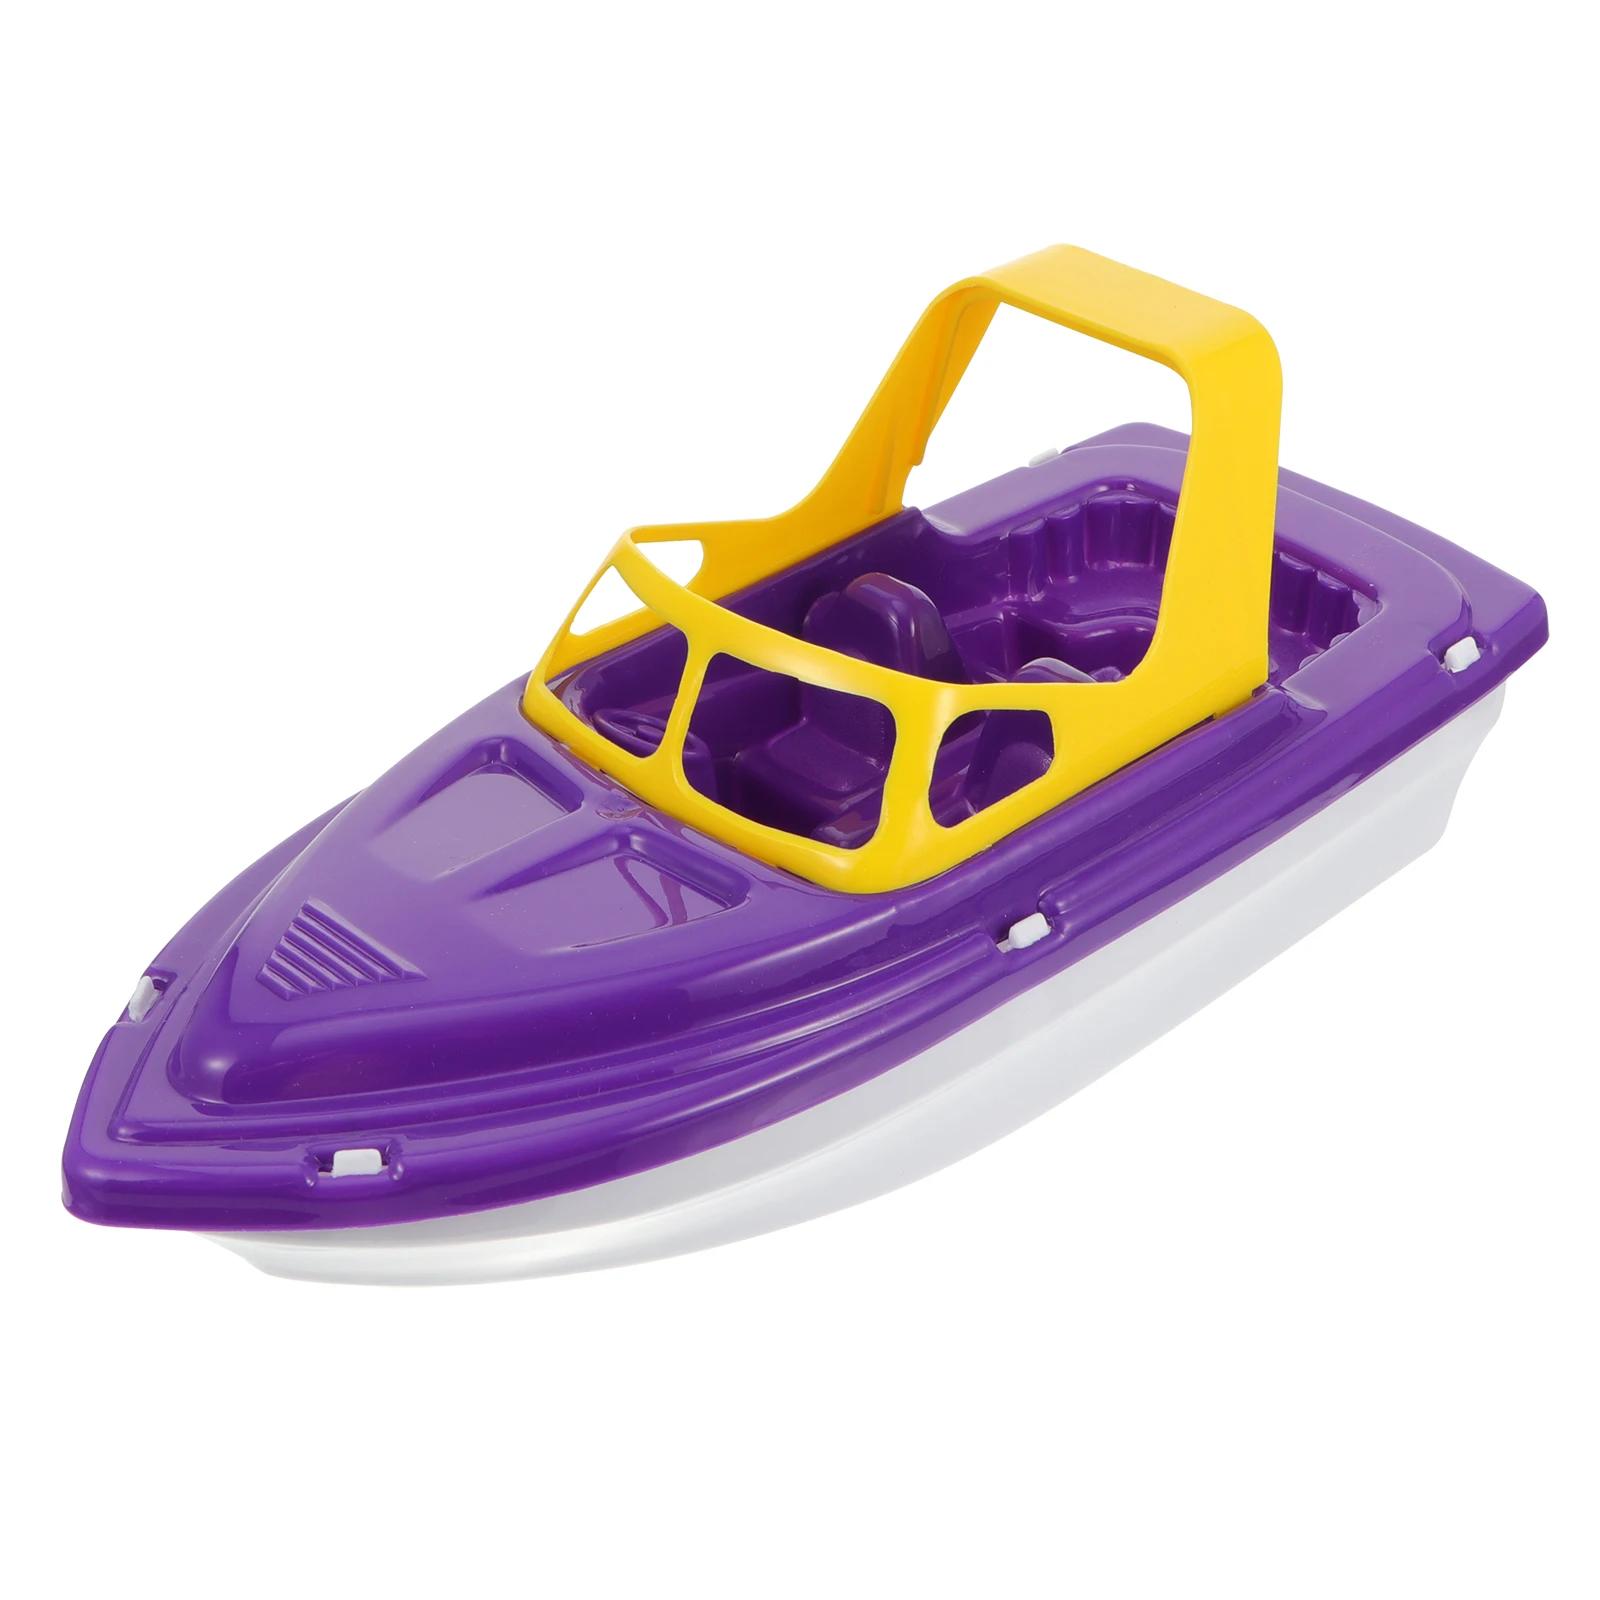 Toys Toy Boat Bathpool Boats Kids Beachbathtub Baby Floating Water Toddler - £12.39 GBP